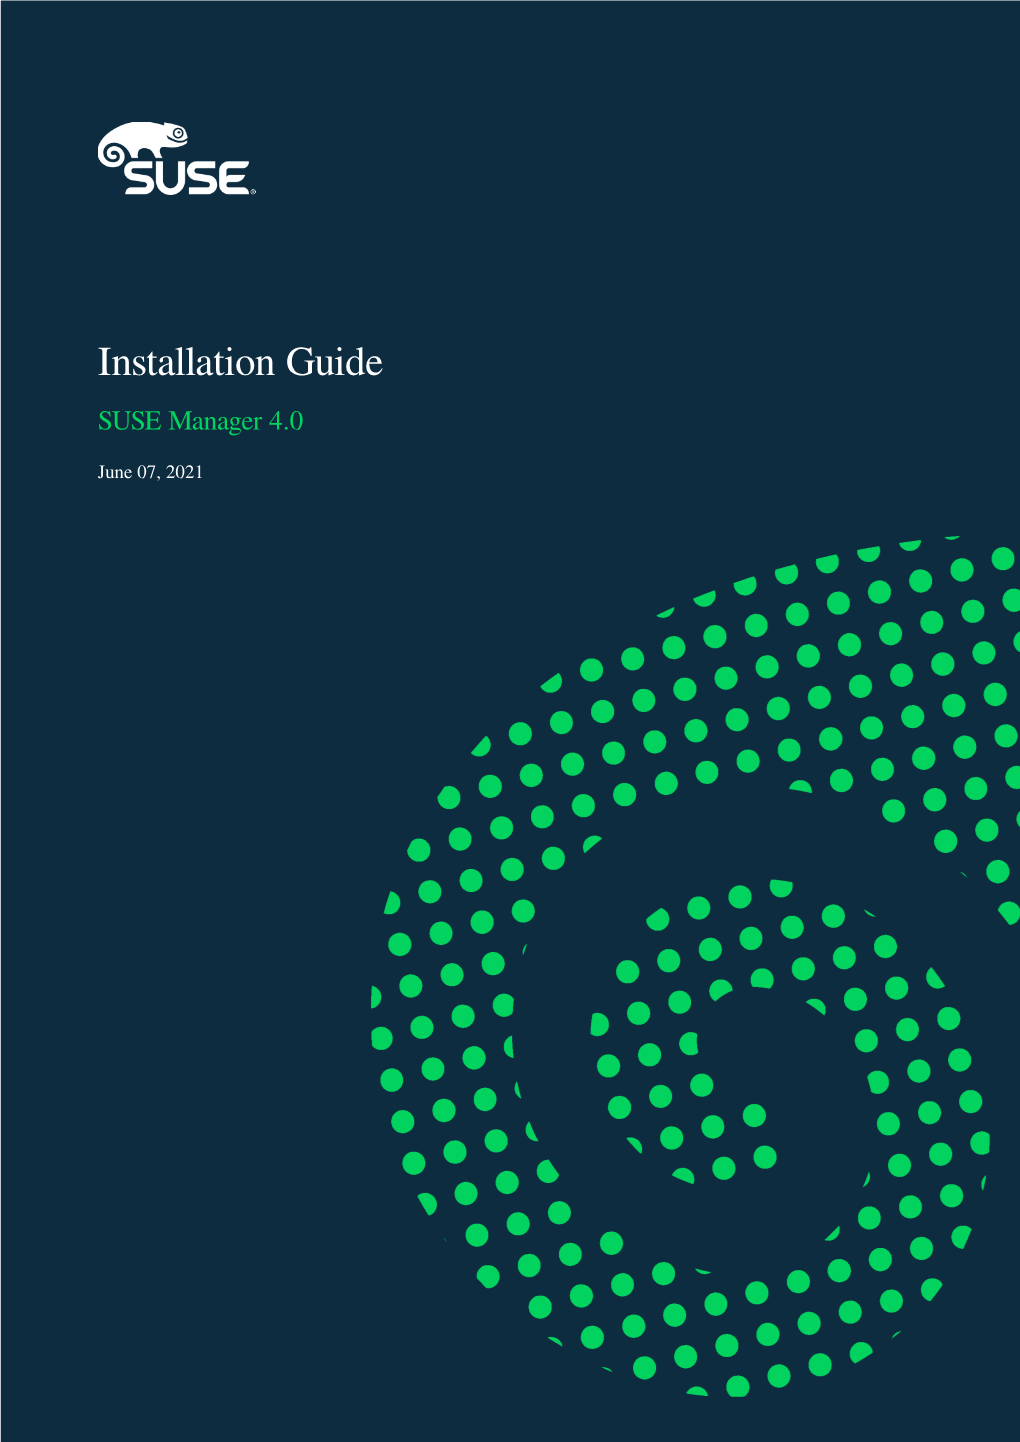 Installation Guide: SUSE Manager